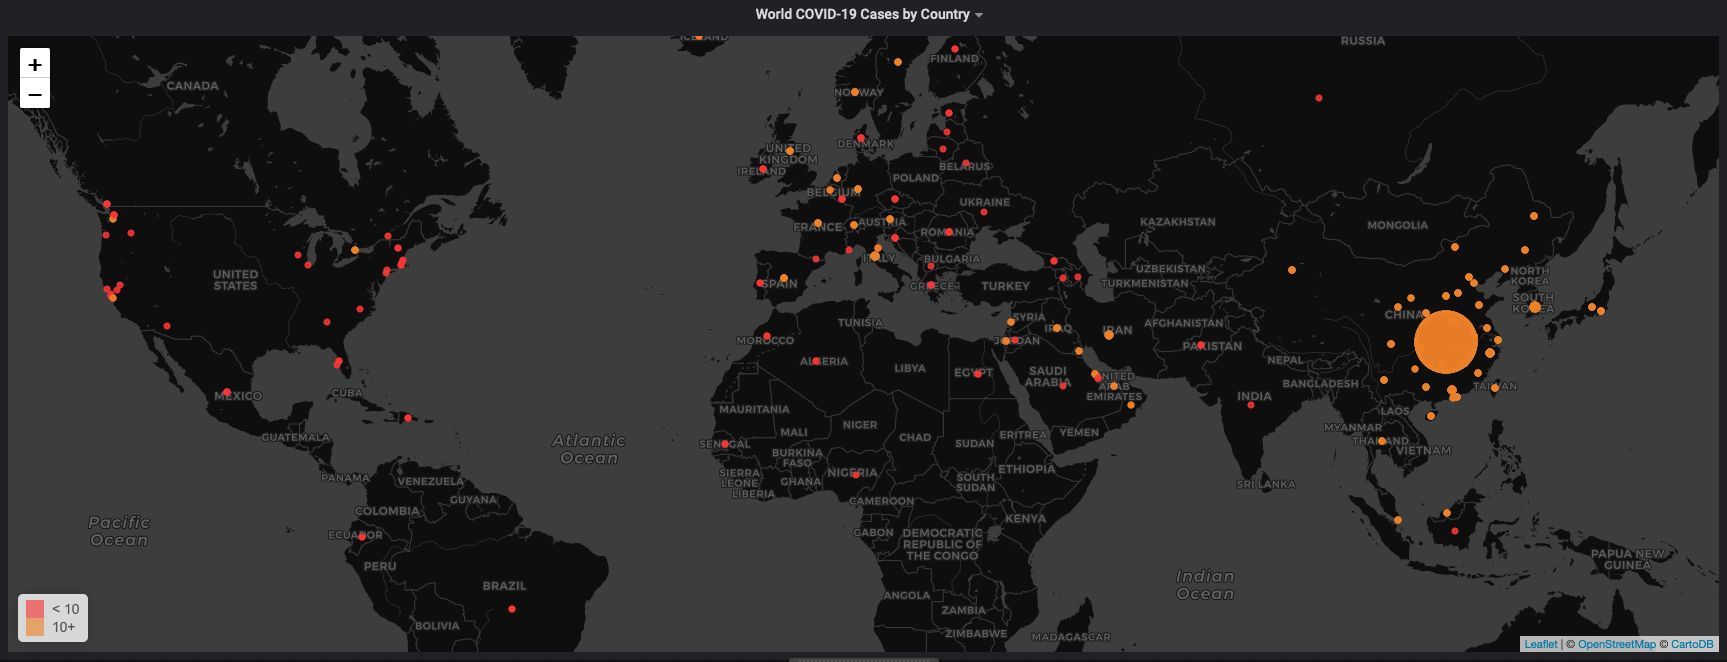 Grafana worldmap, showing confirmed COVID-19 cases as of early March